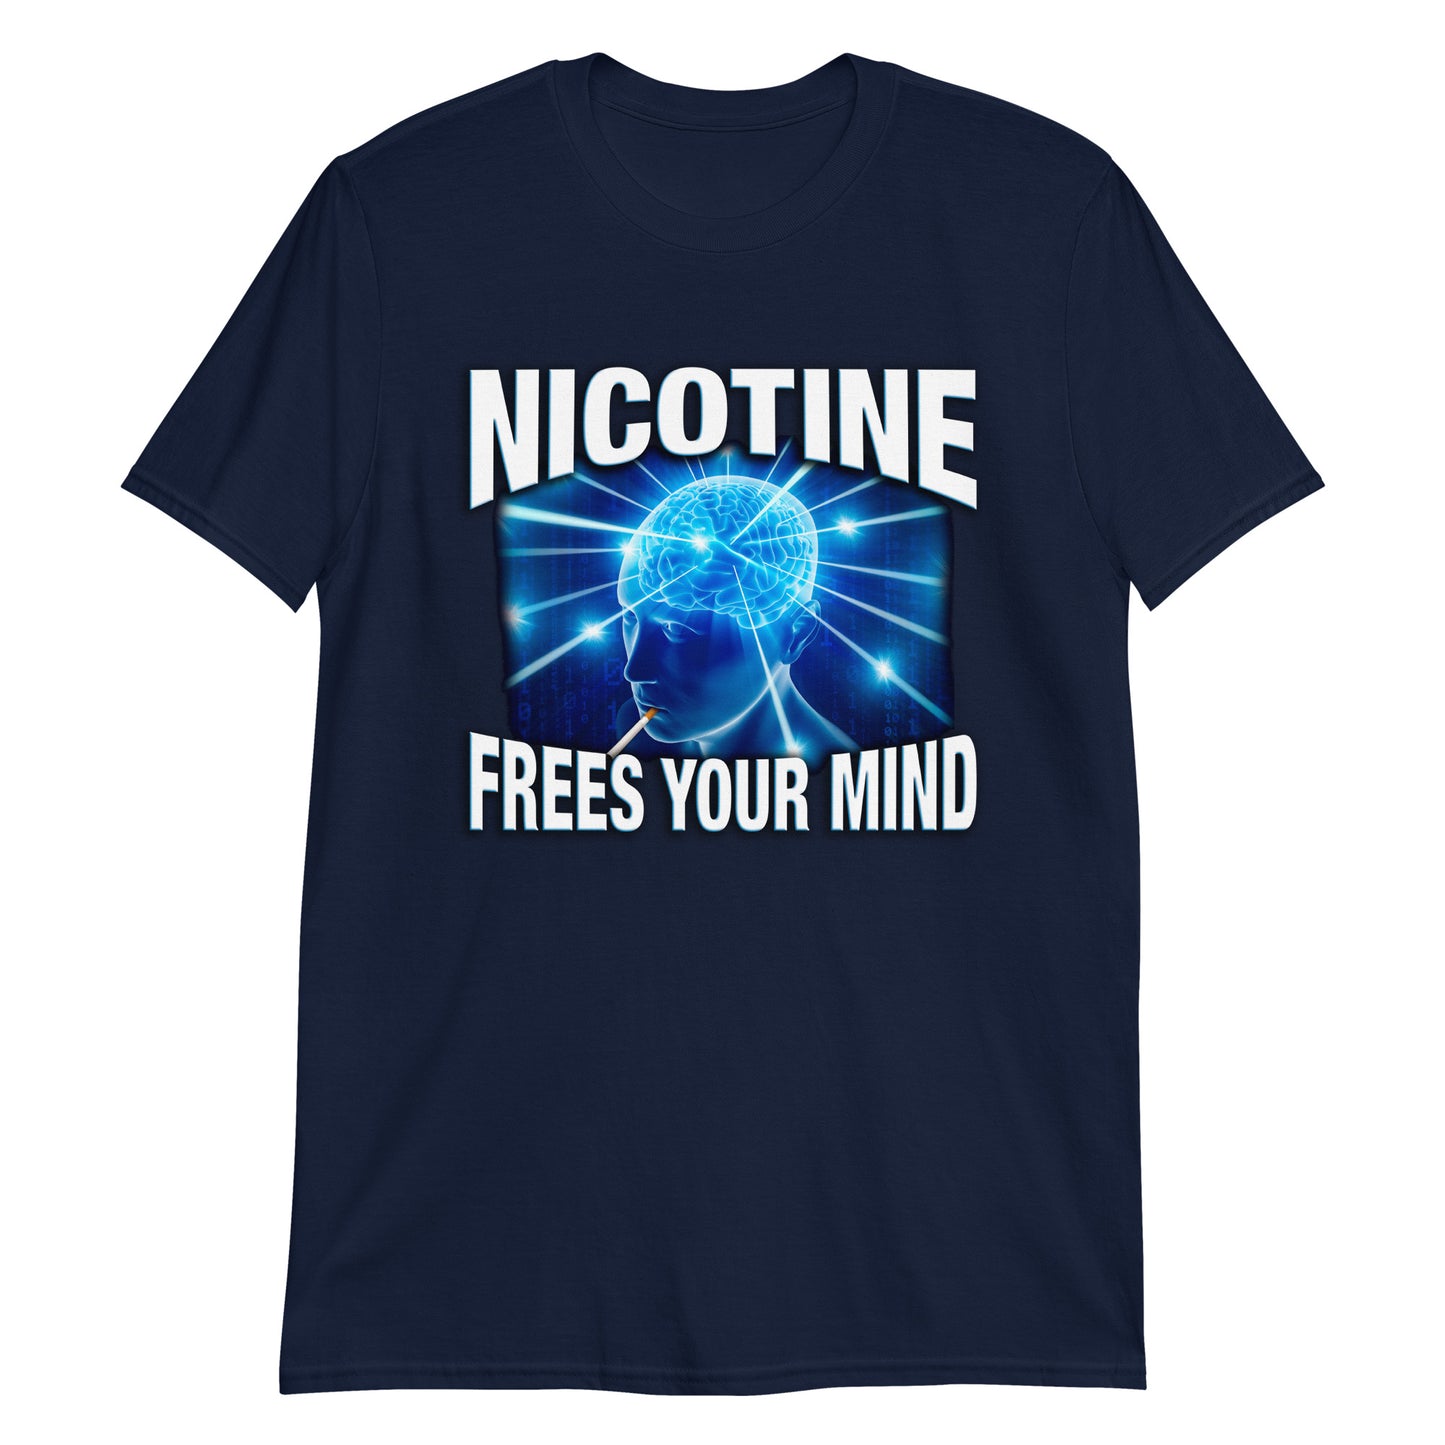 Nicotine Frees Your Mind.